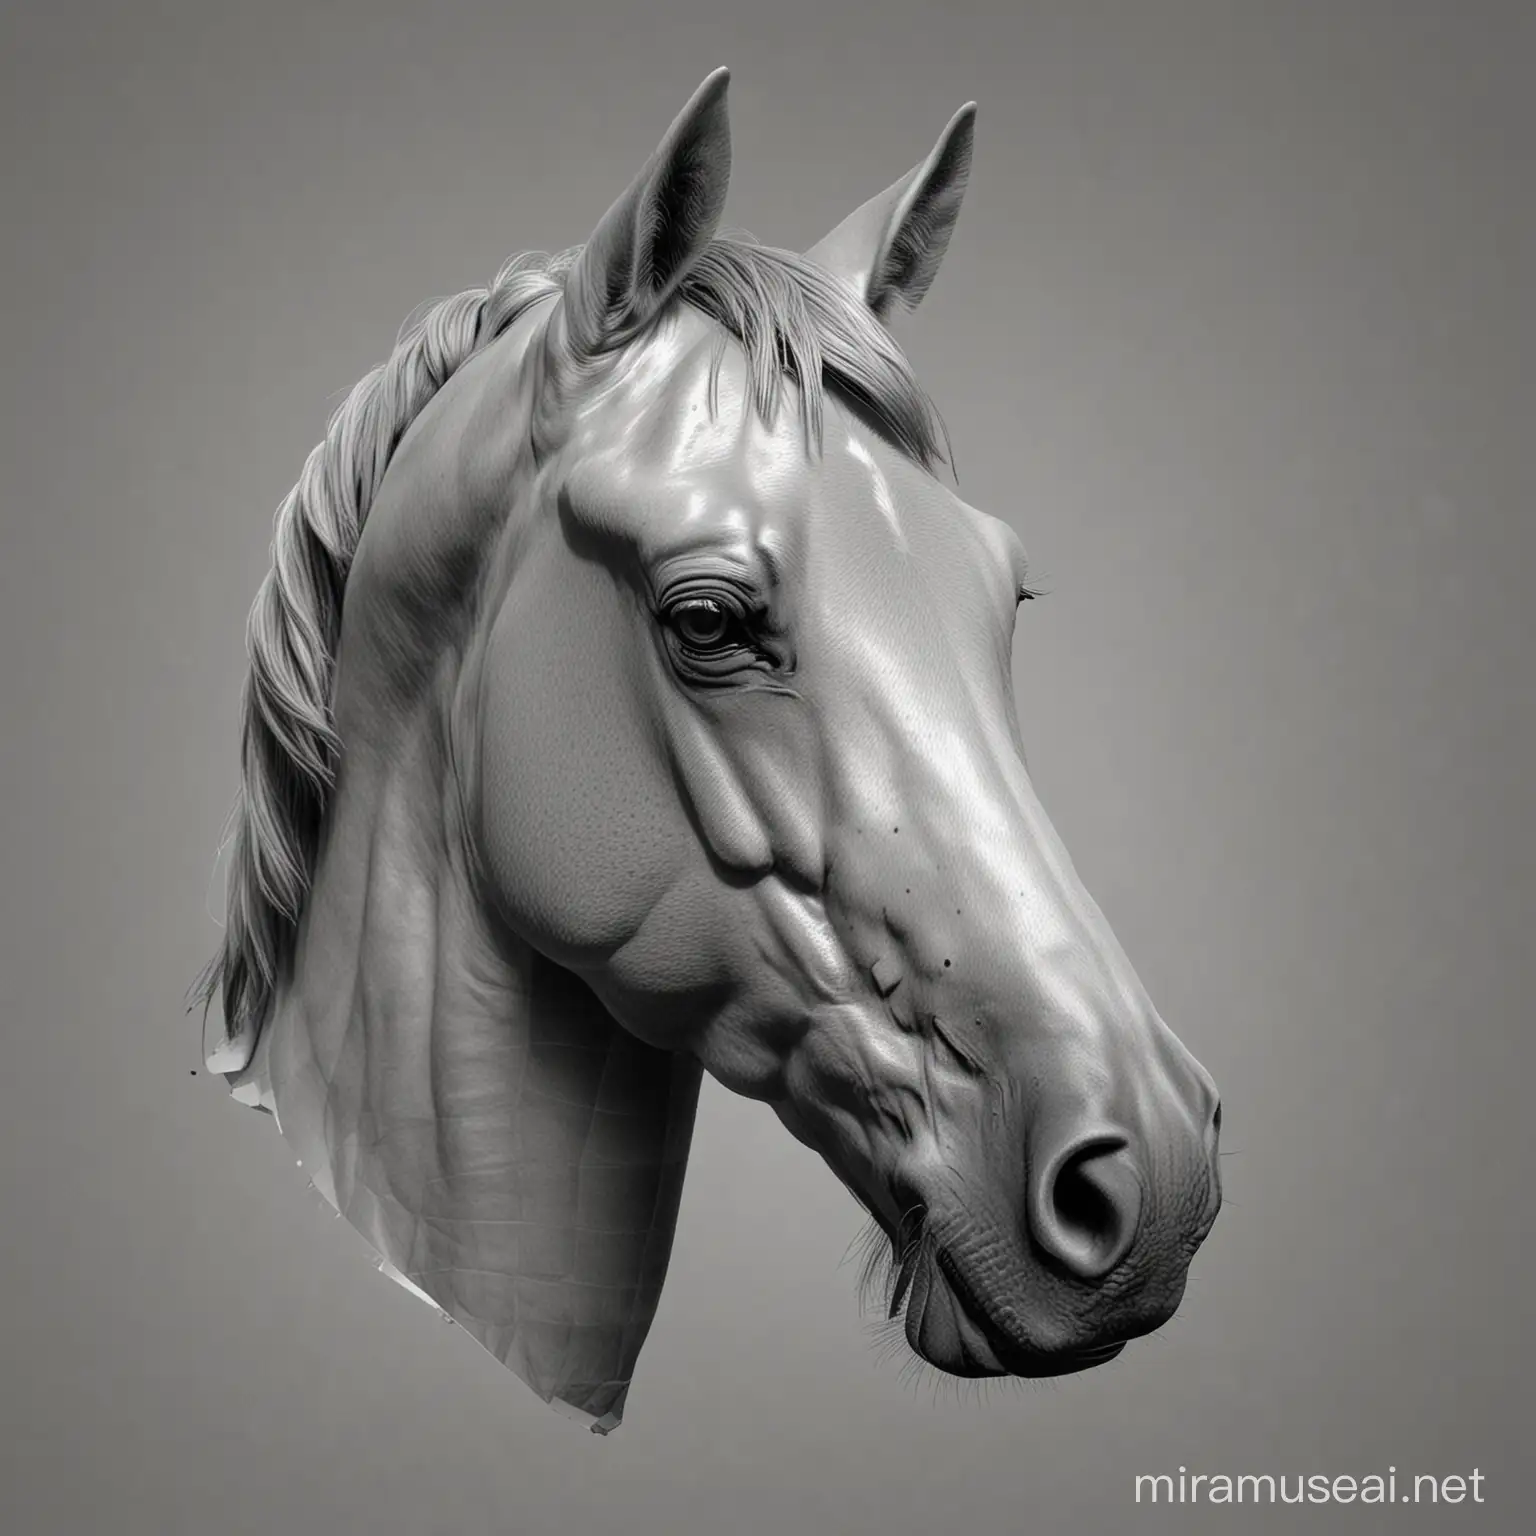 horse head depth map with light grey being the closer the the camera and black for the far from it. no shadows


